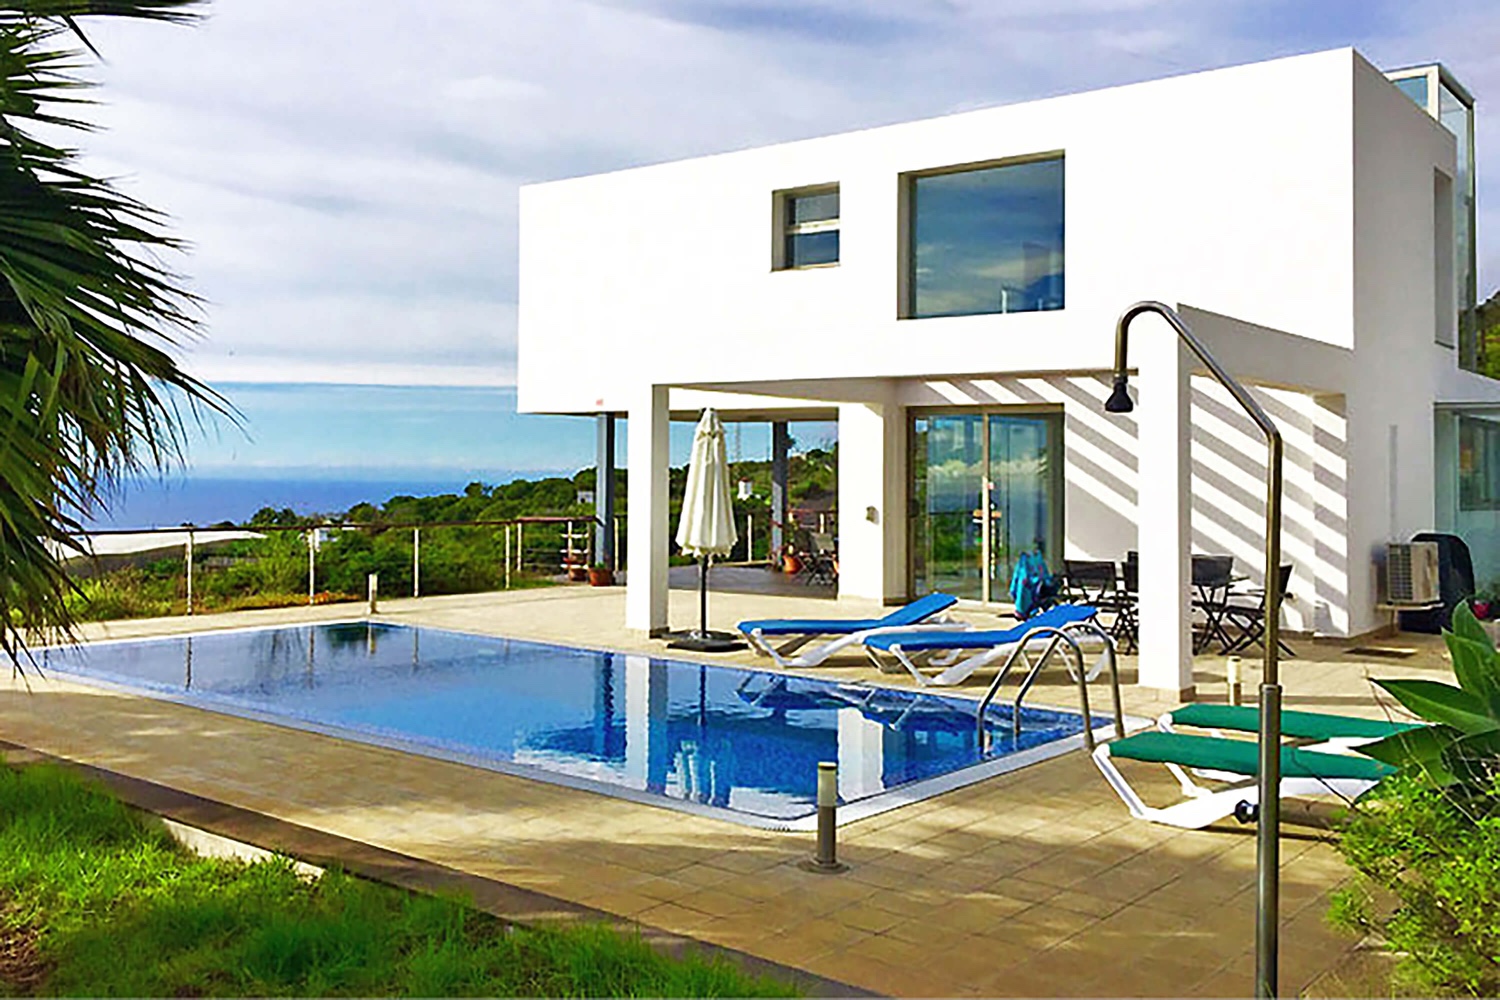 Luxurious holiday home for rent on La Palma with modern architecture with large pool and beautiful panoramic sea views